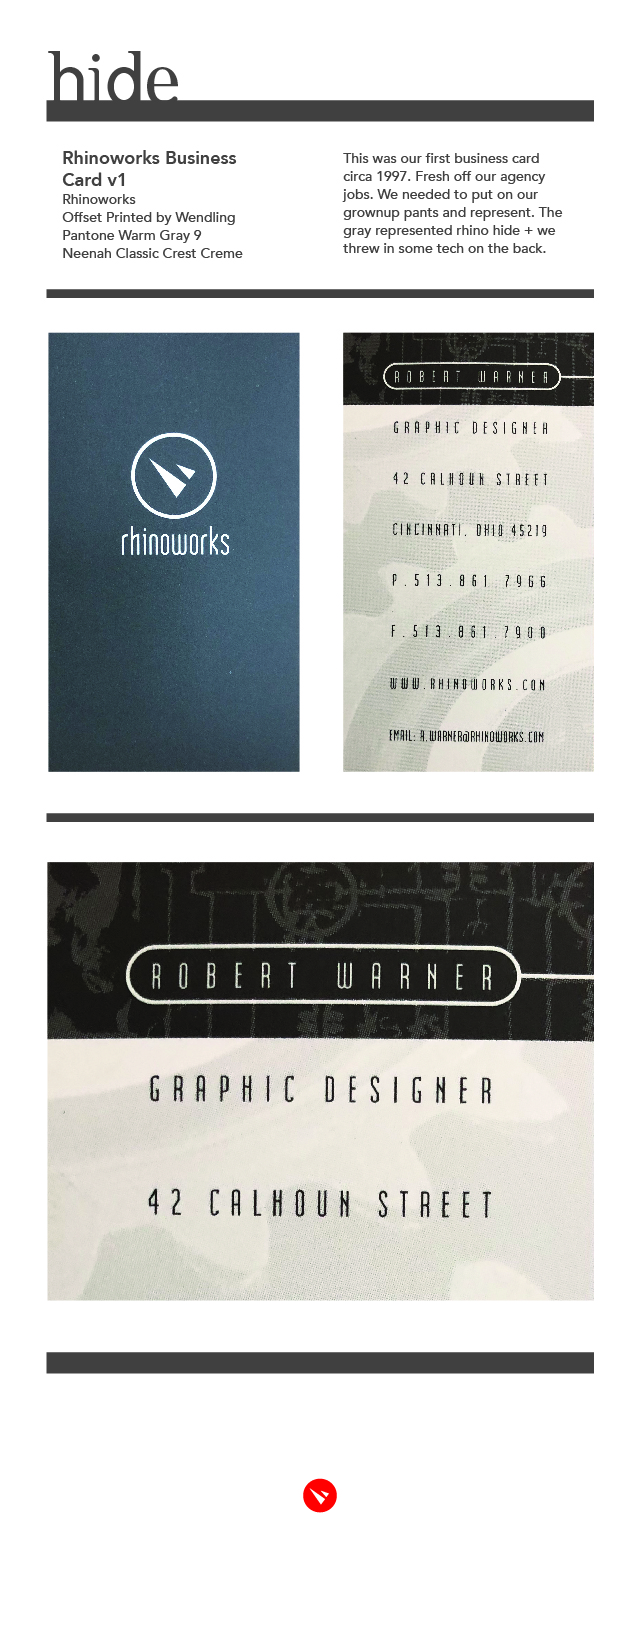 First Rhinoworks Business Card